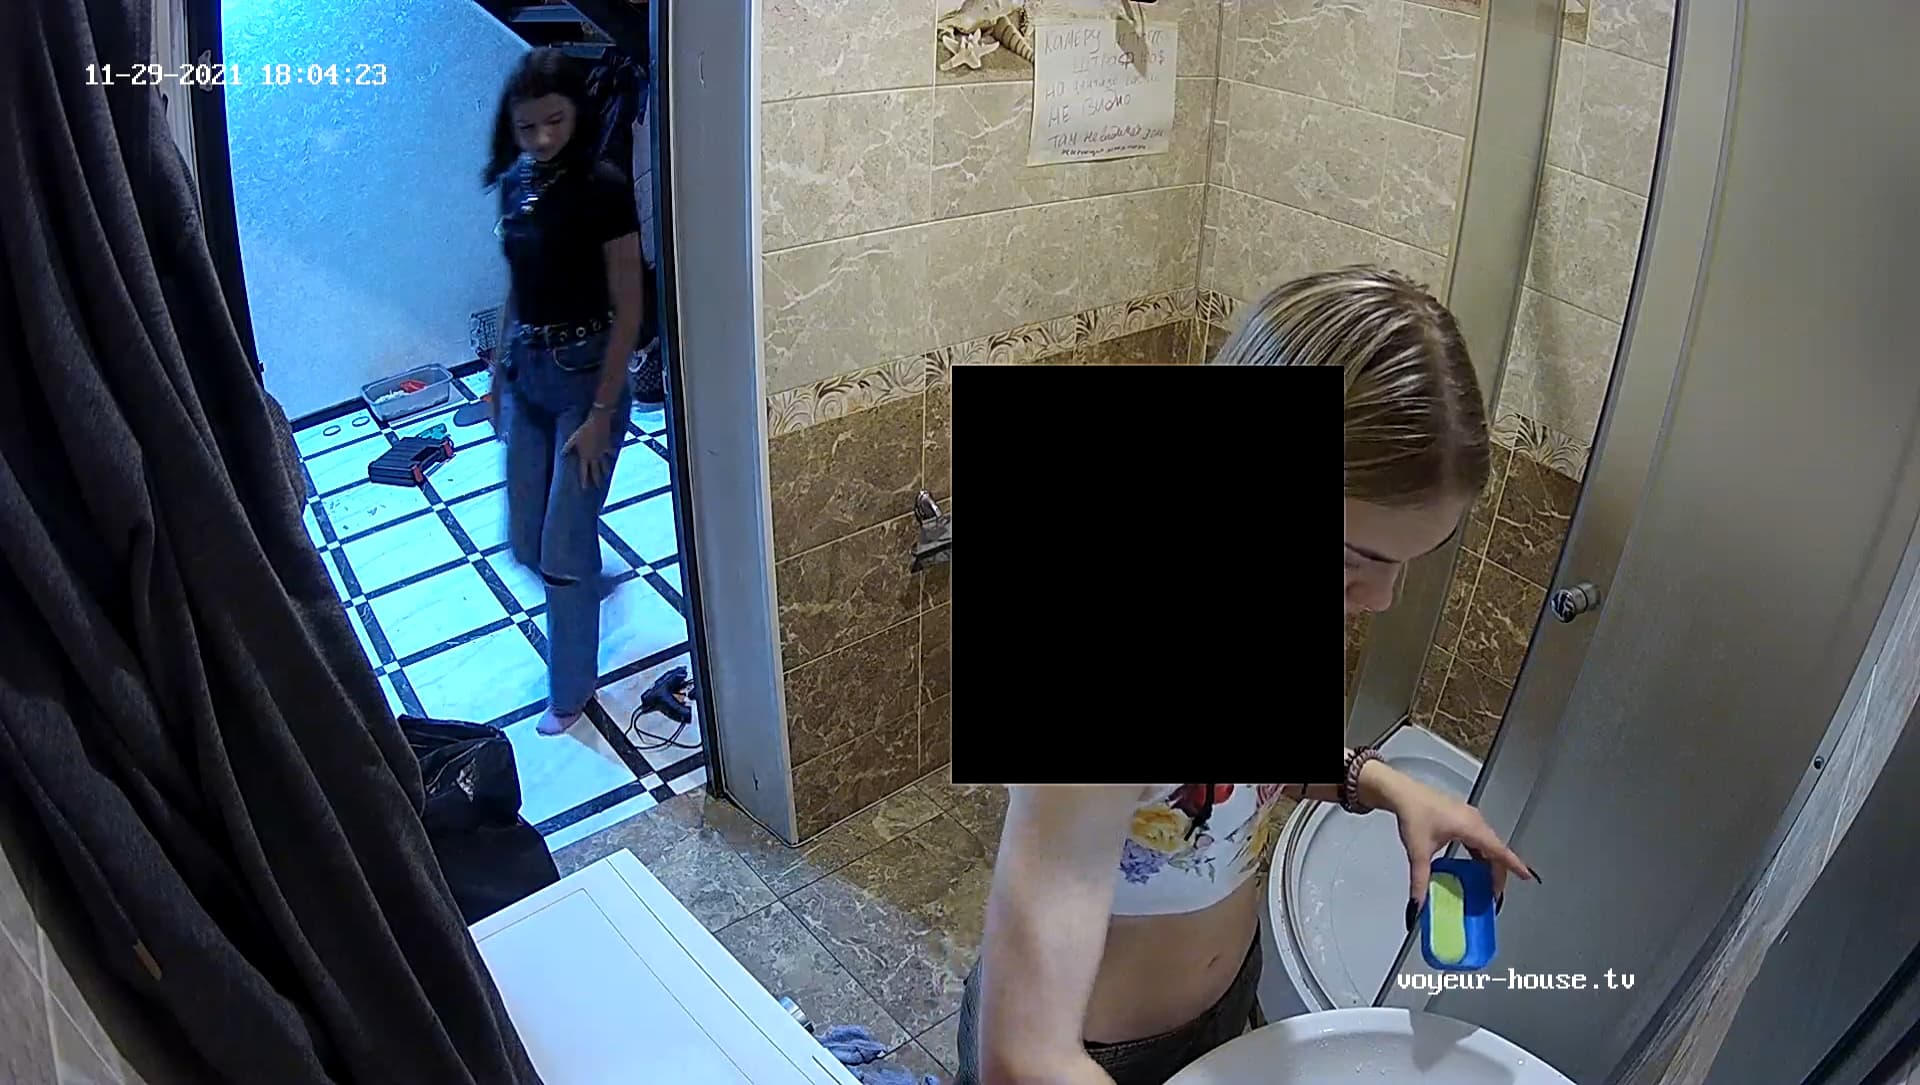 Should toilet cams be banned? - Your Feedback and Ideas picture pic